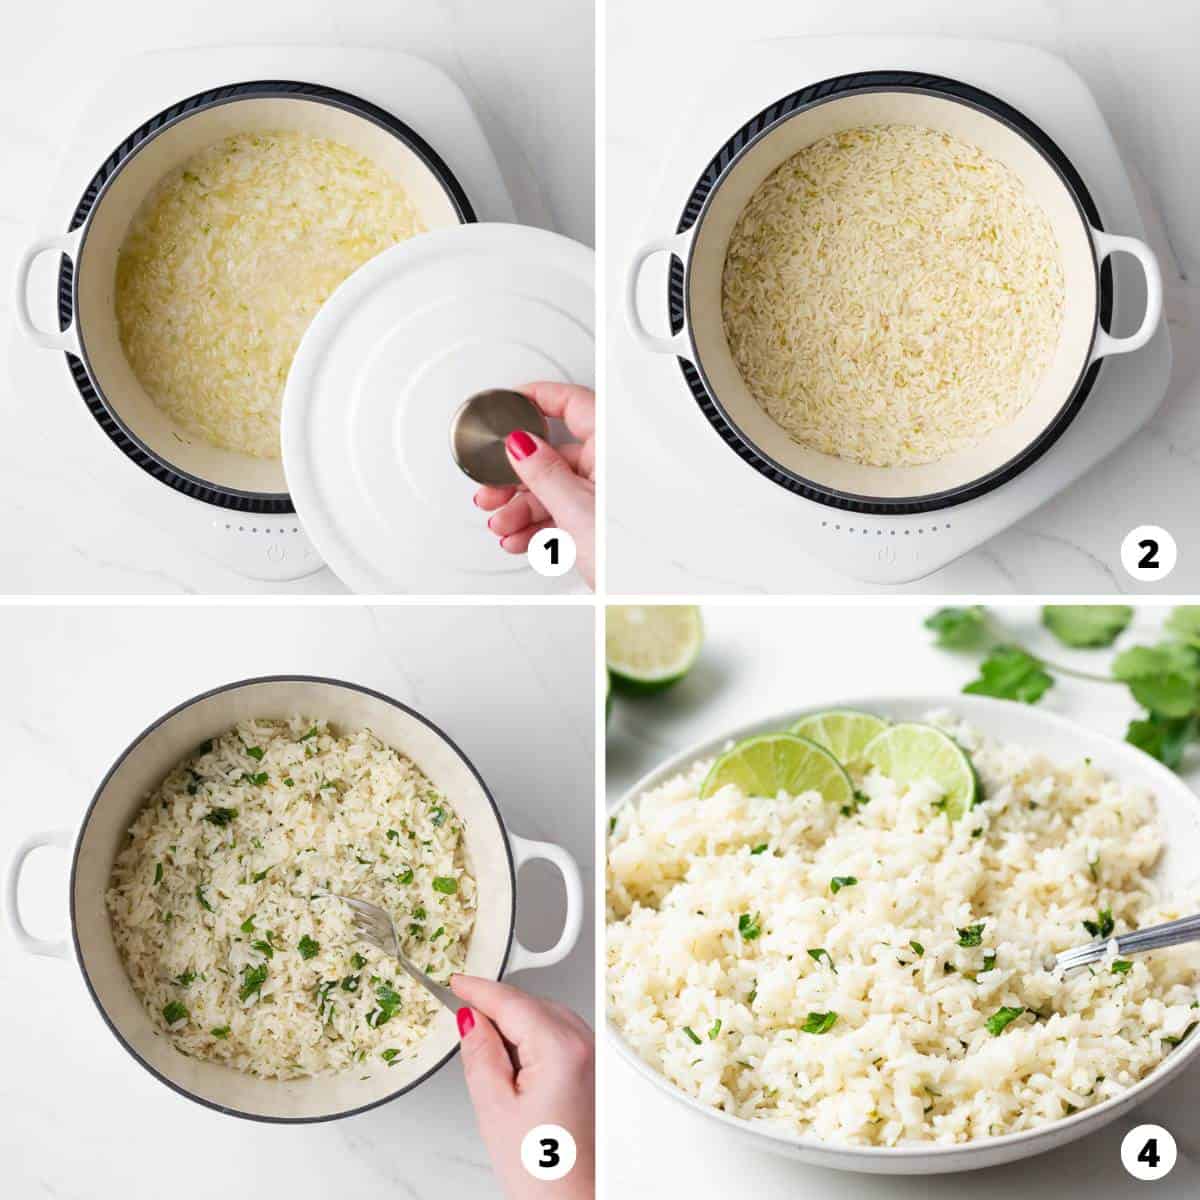 Showing how to make cilantro lime rice in a 4 step collage.